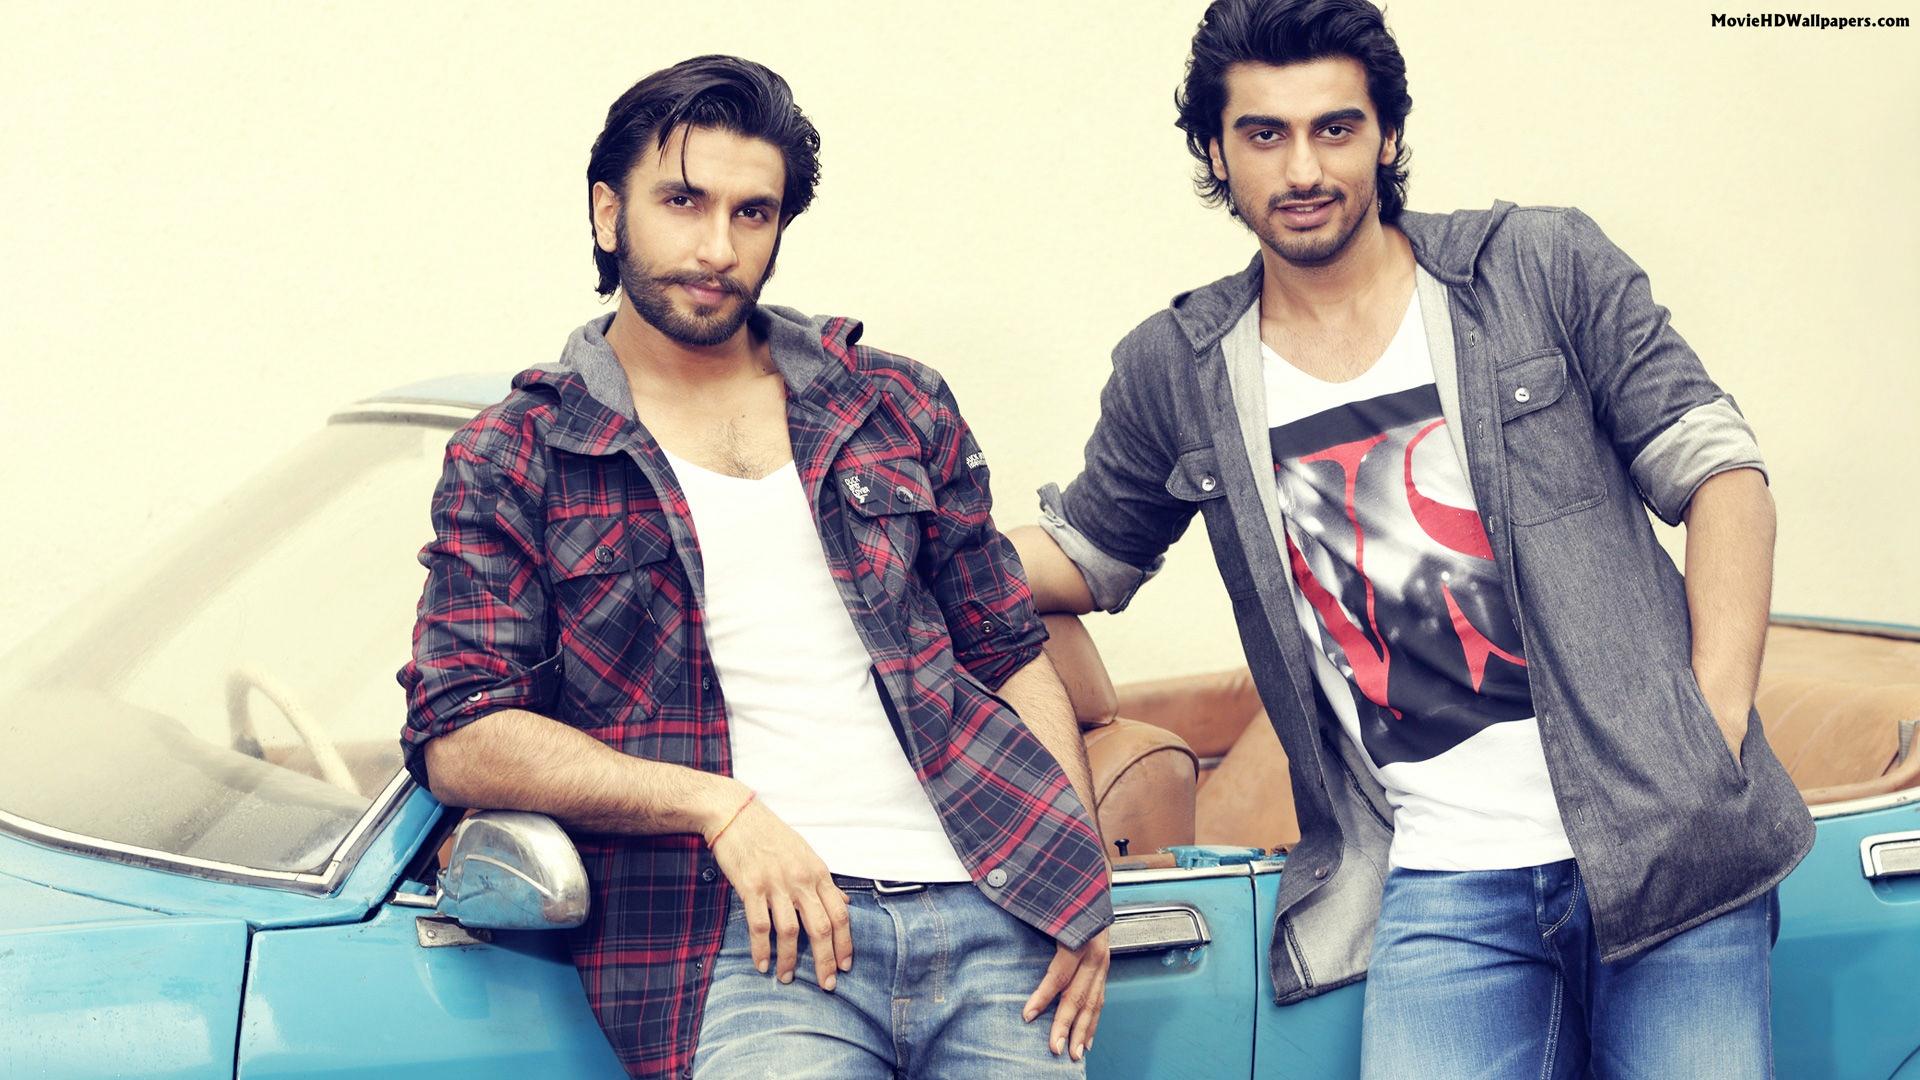 Gunday (2013) - Movie HD Wallpapers